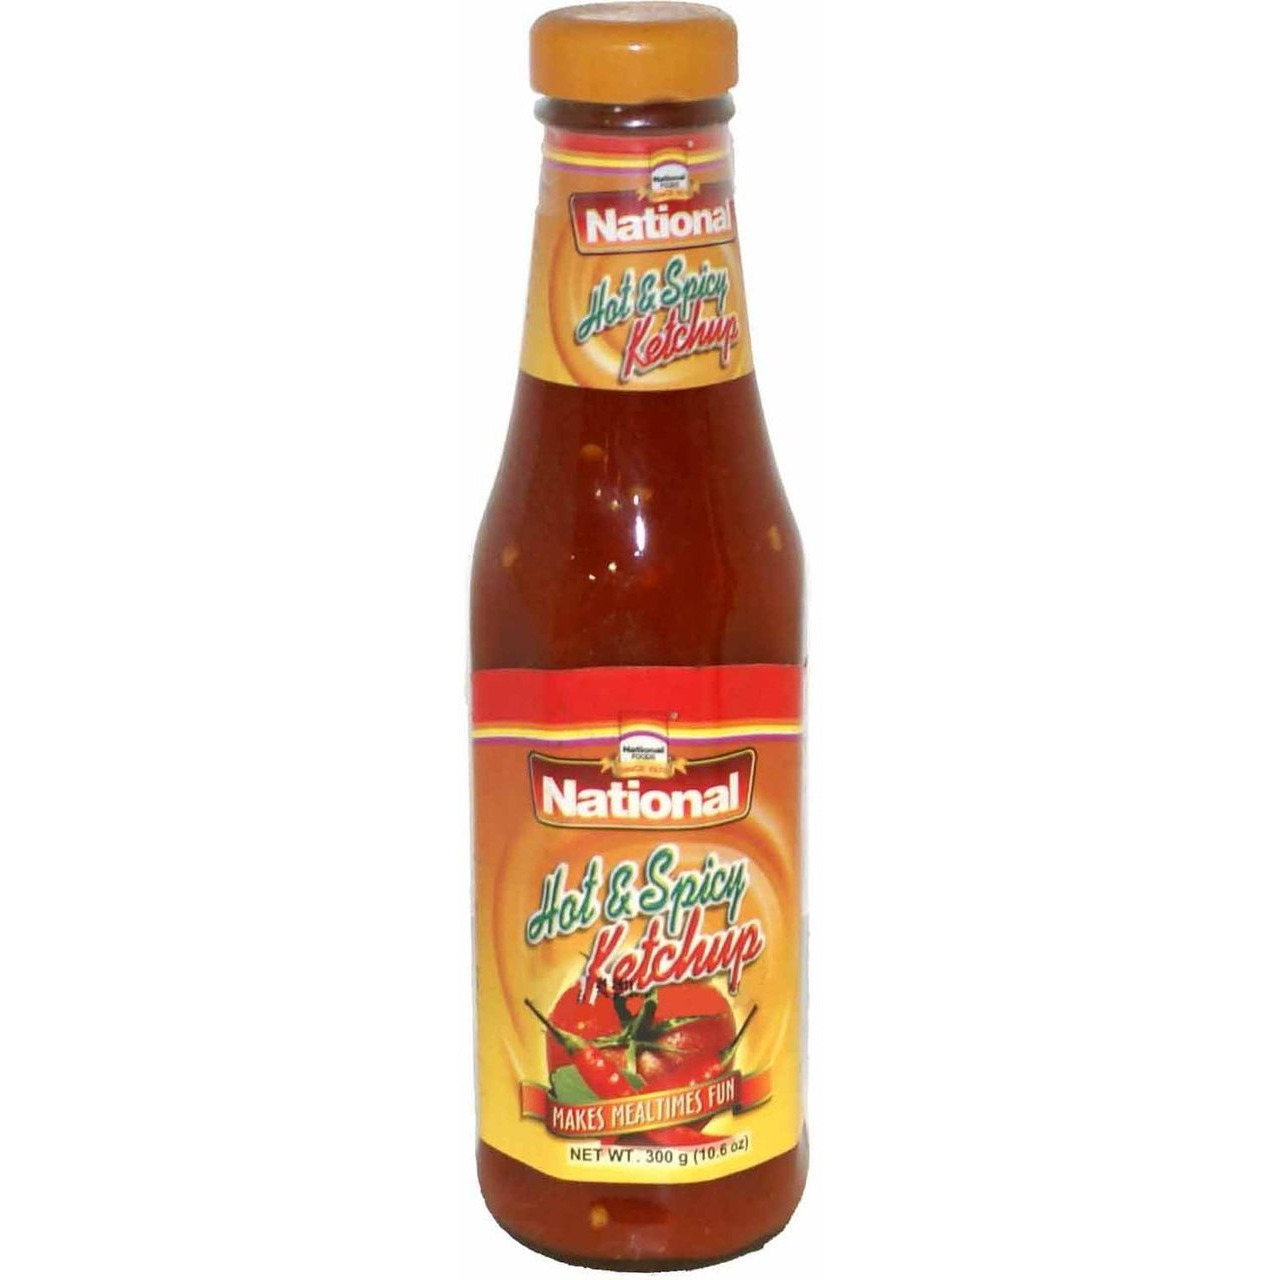 Case of 12 - National Tomato Ketchup - 300 Gm (10.5 Oz)